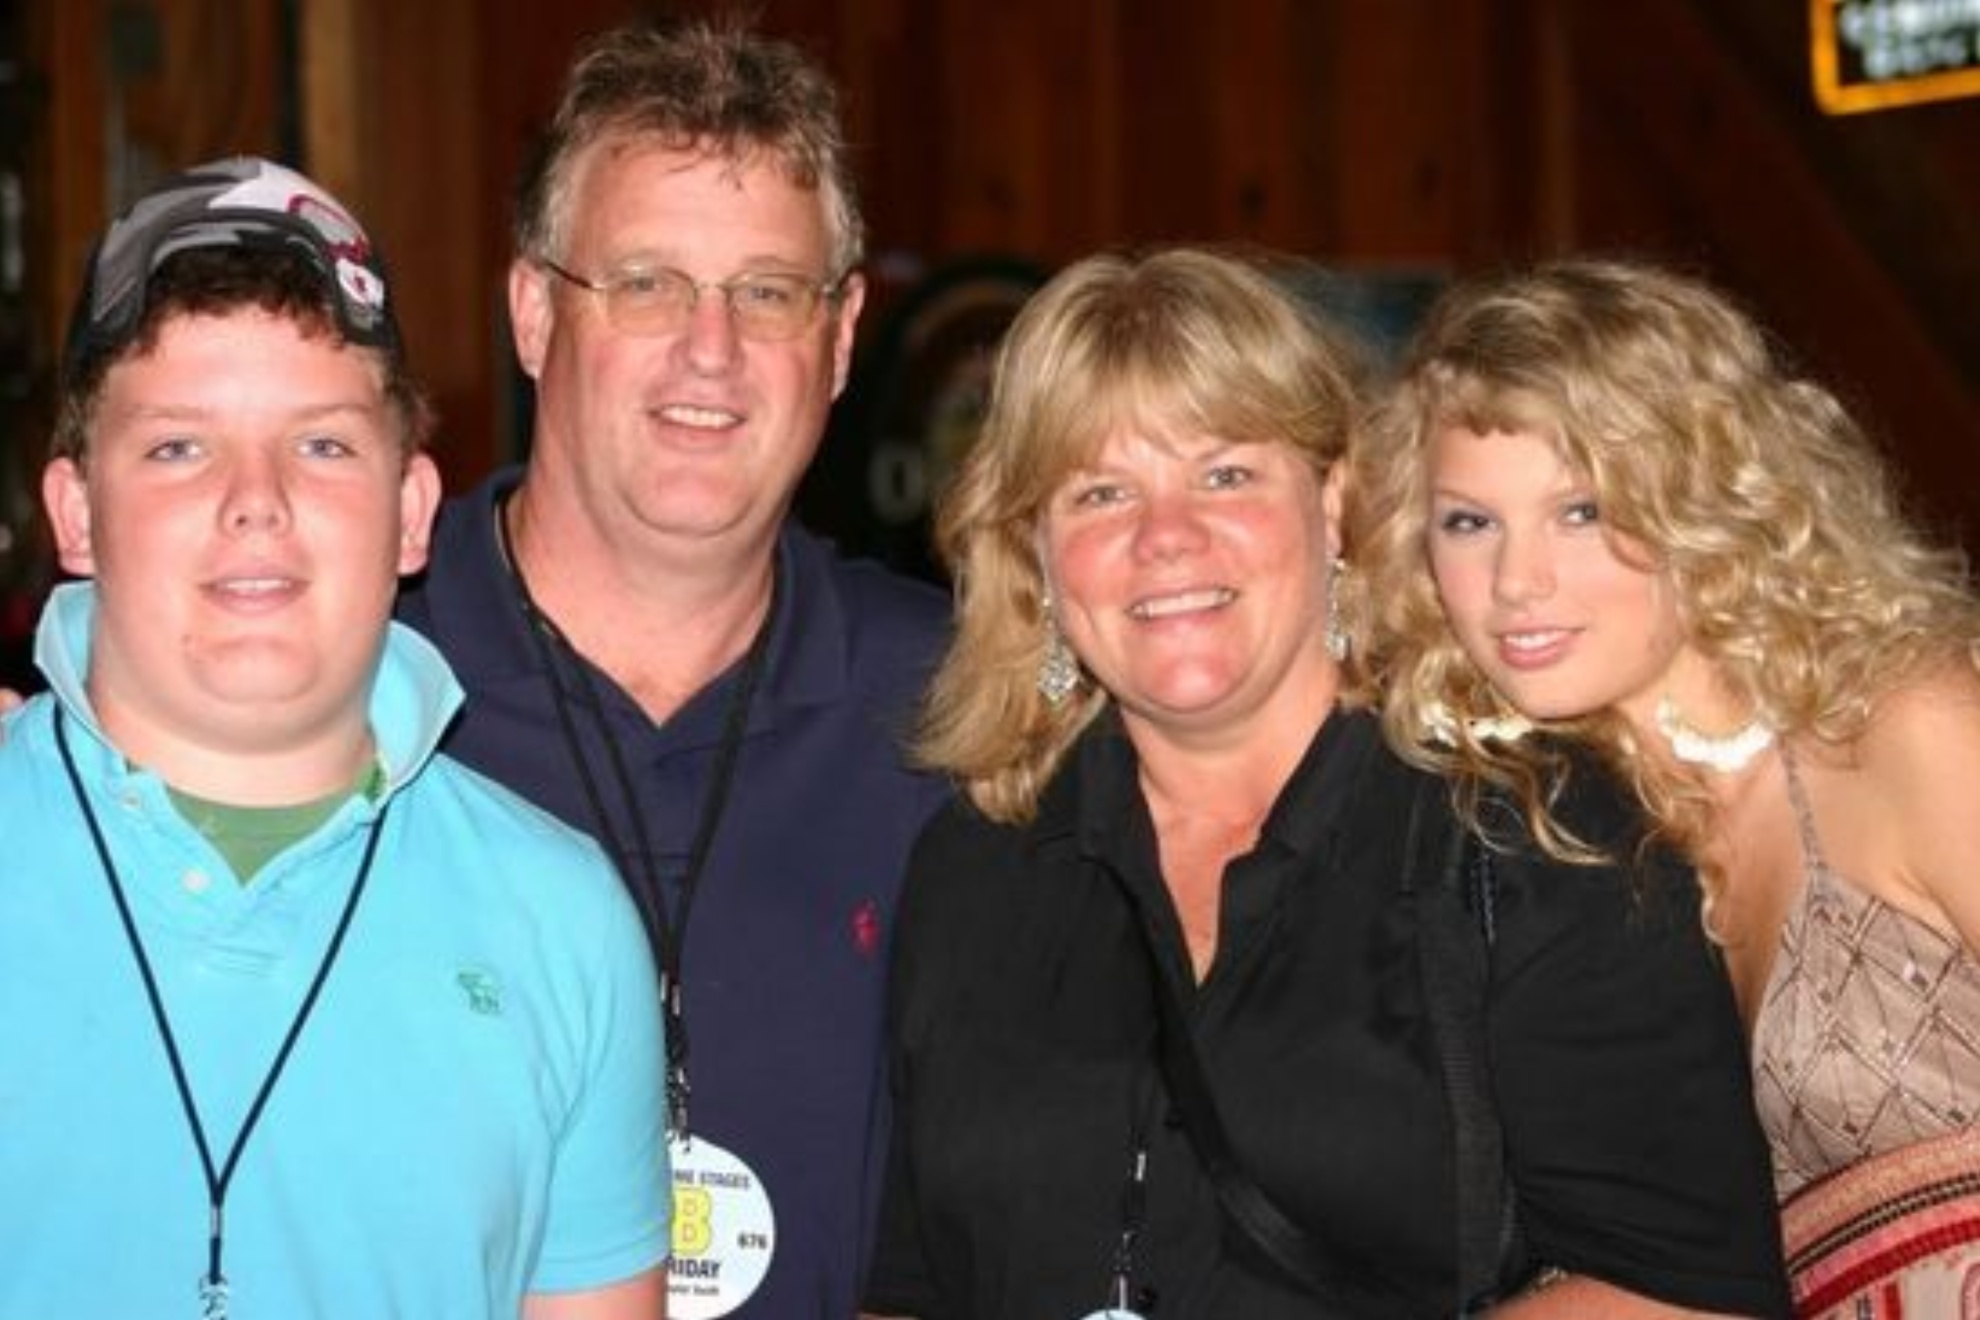 Her family is a key part of Taylor Swifts success.